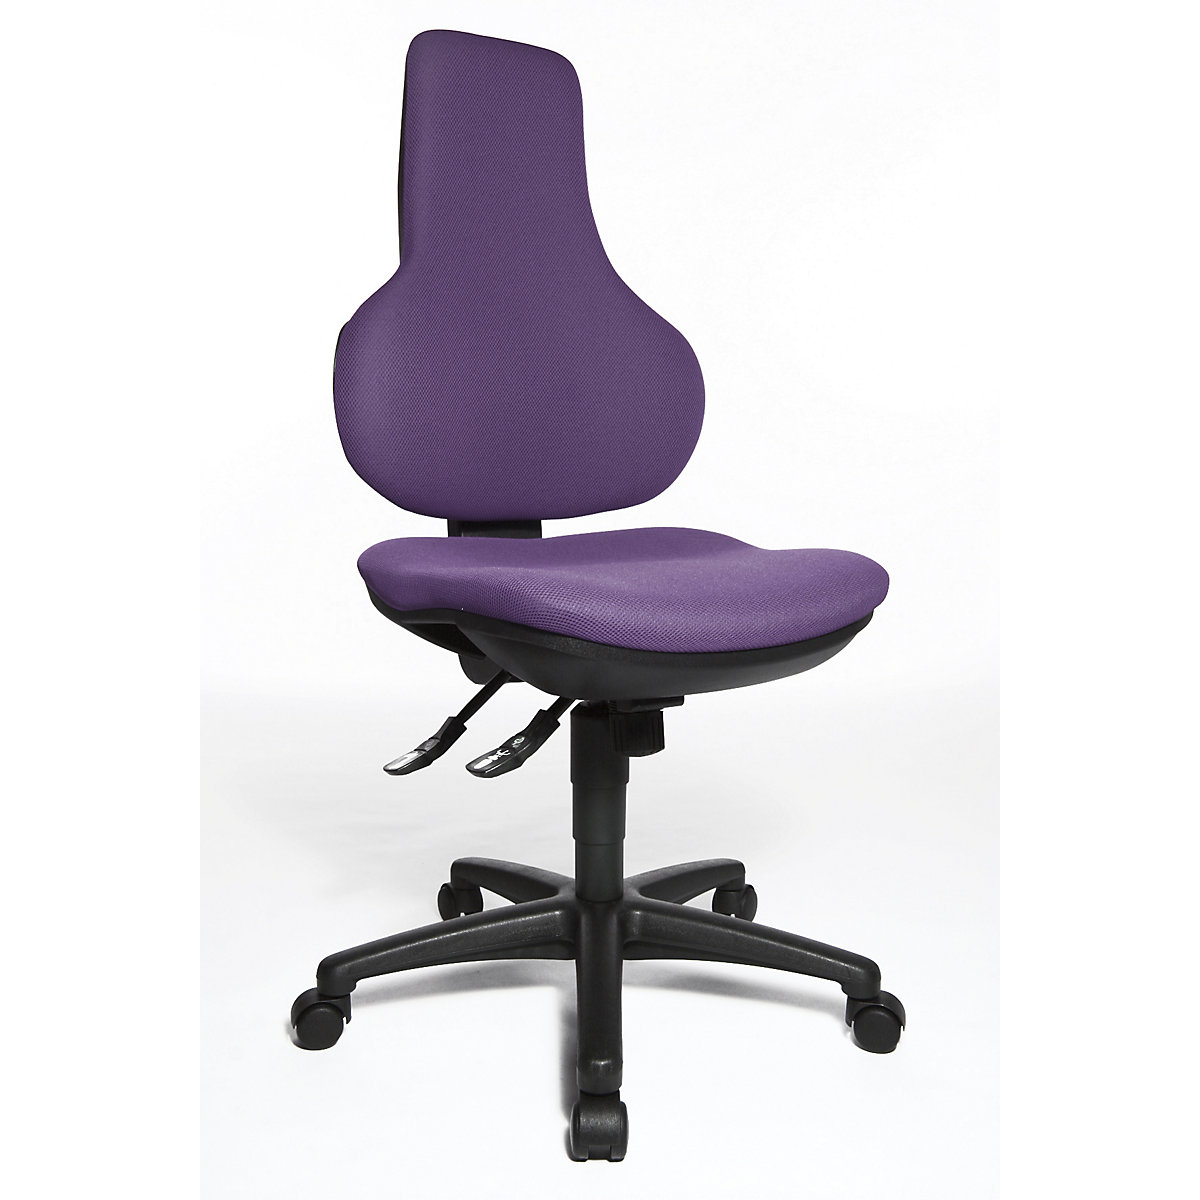 ERGO POINT SY office swivel chair – Topstar, with height adjustable ergonomic back rest, purple-6